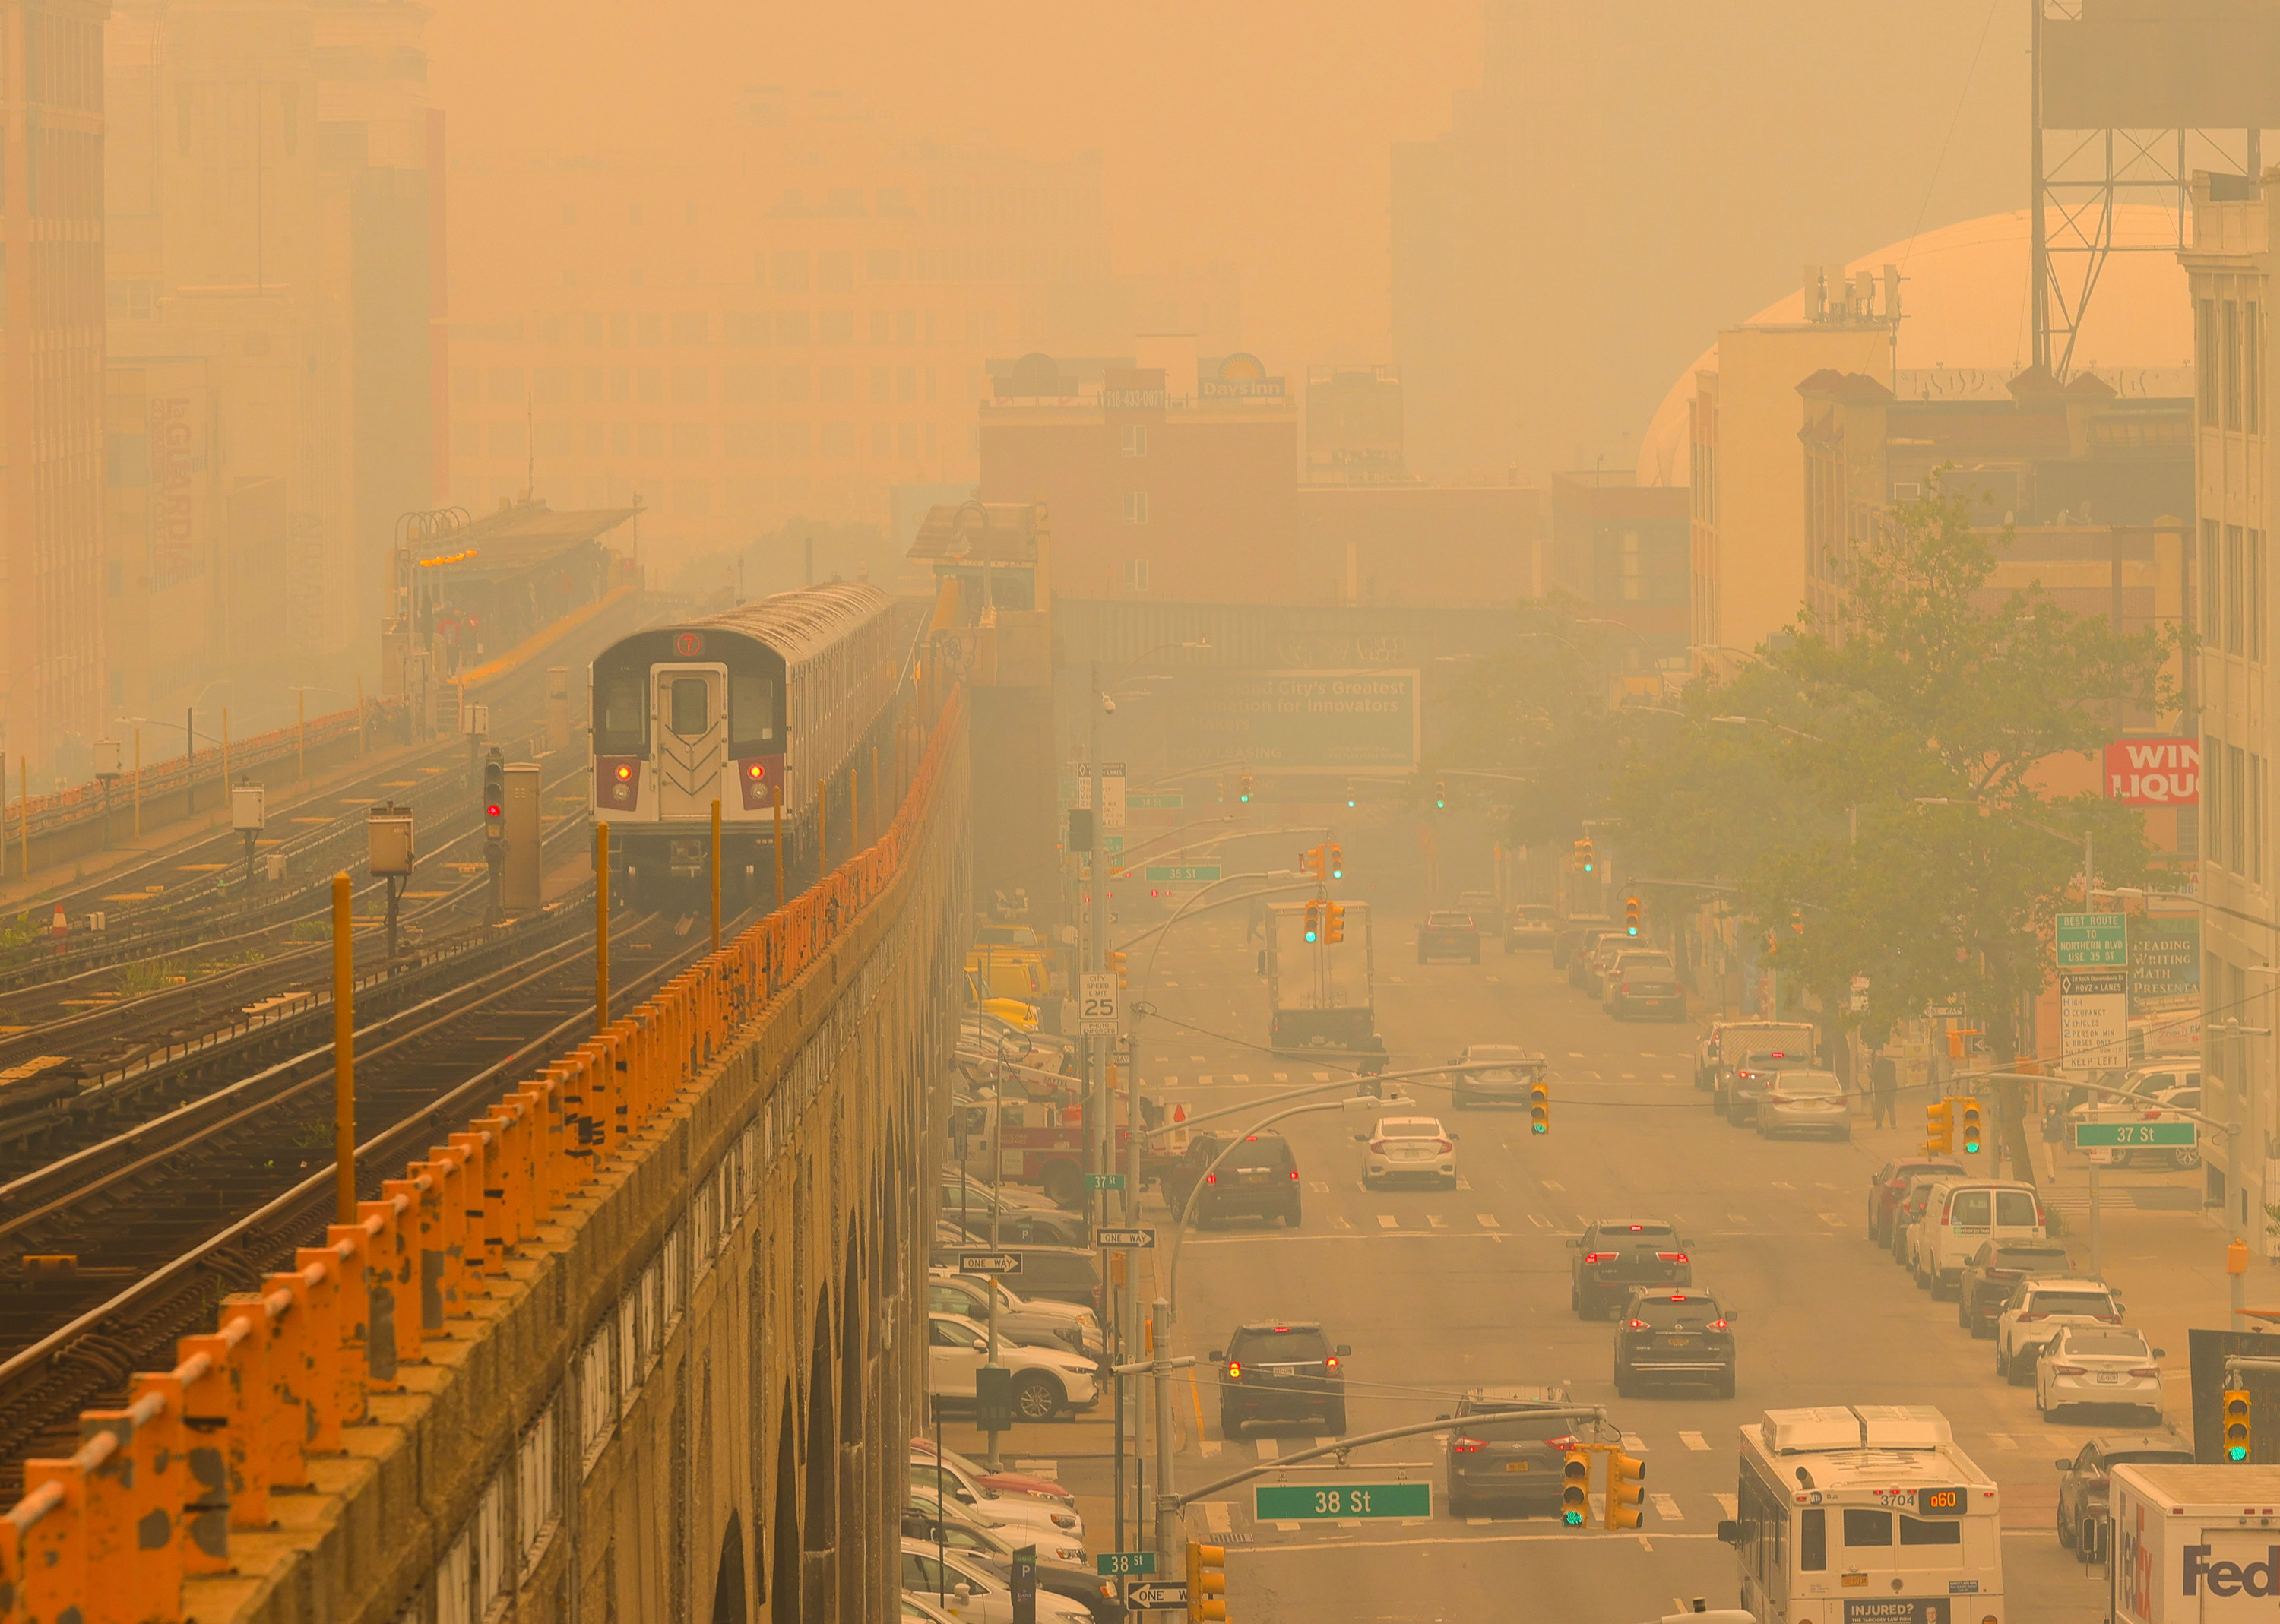 An above ground subway train moves through haze as cars do the same on the right